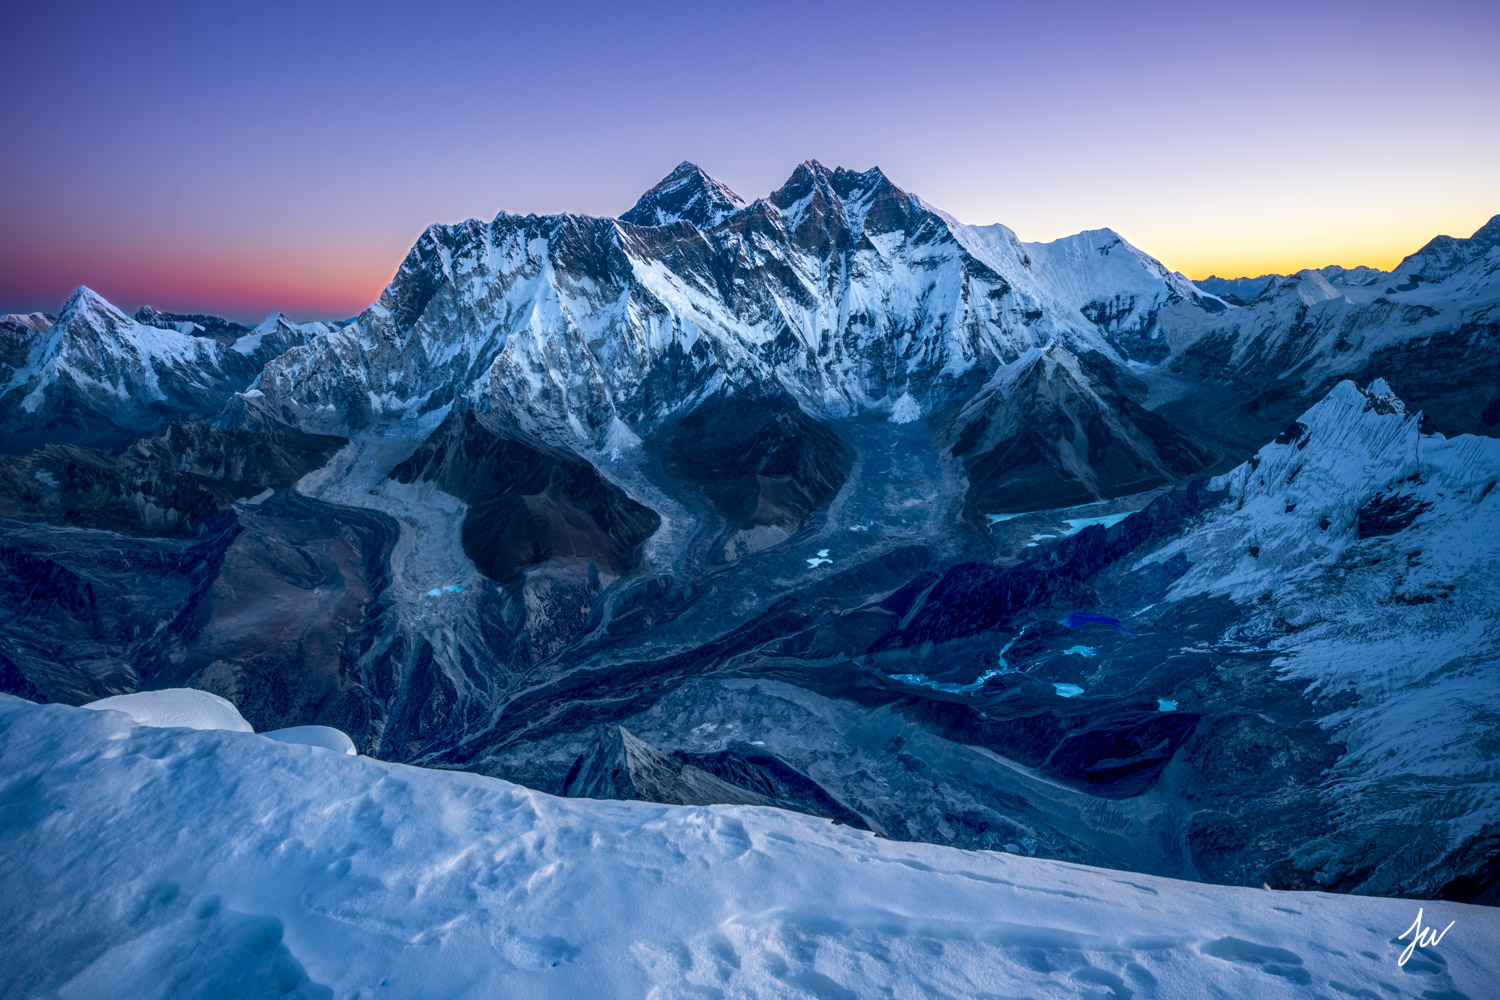 Sunrise on Mt. Everest from summit of Ama Dablam in Nepal. 